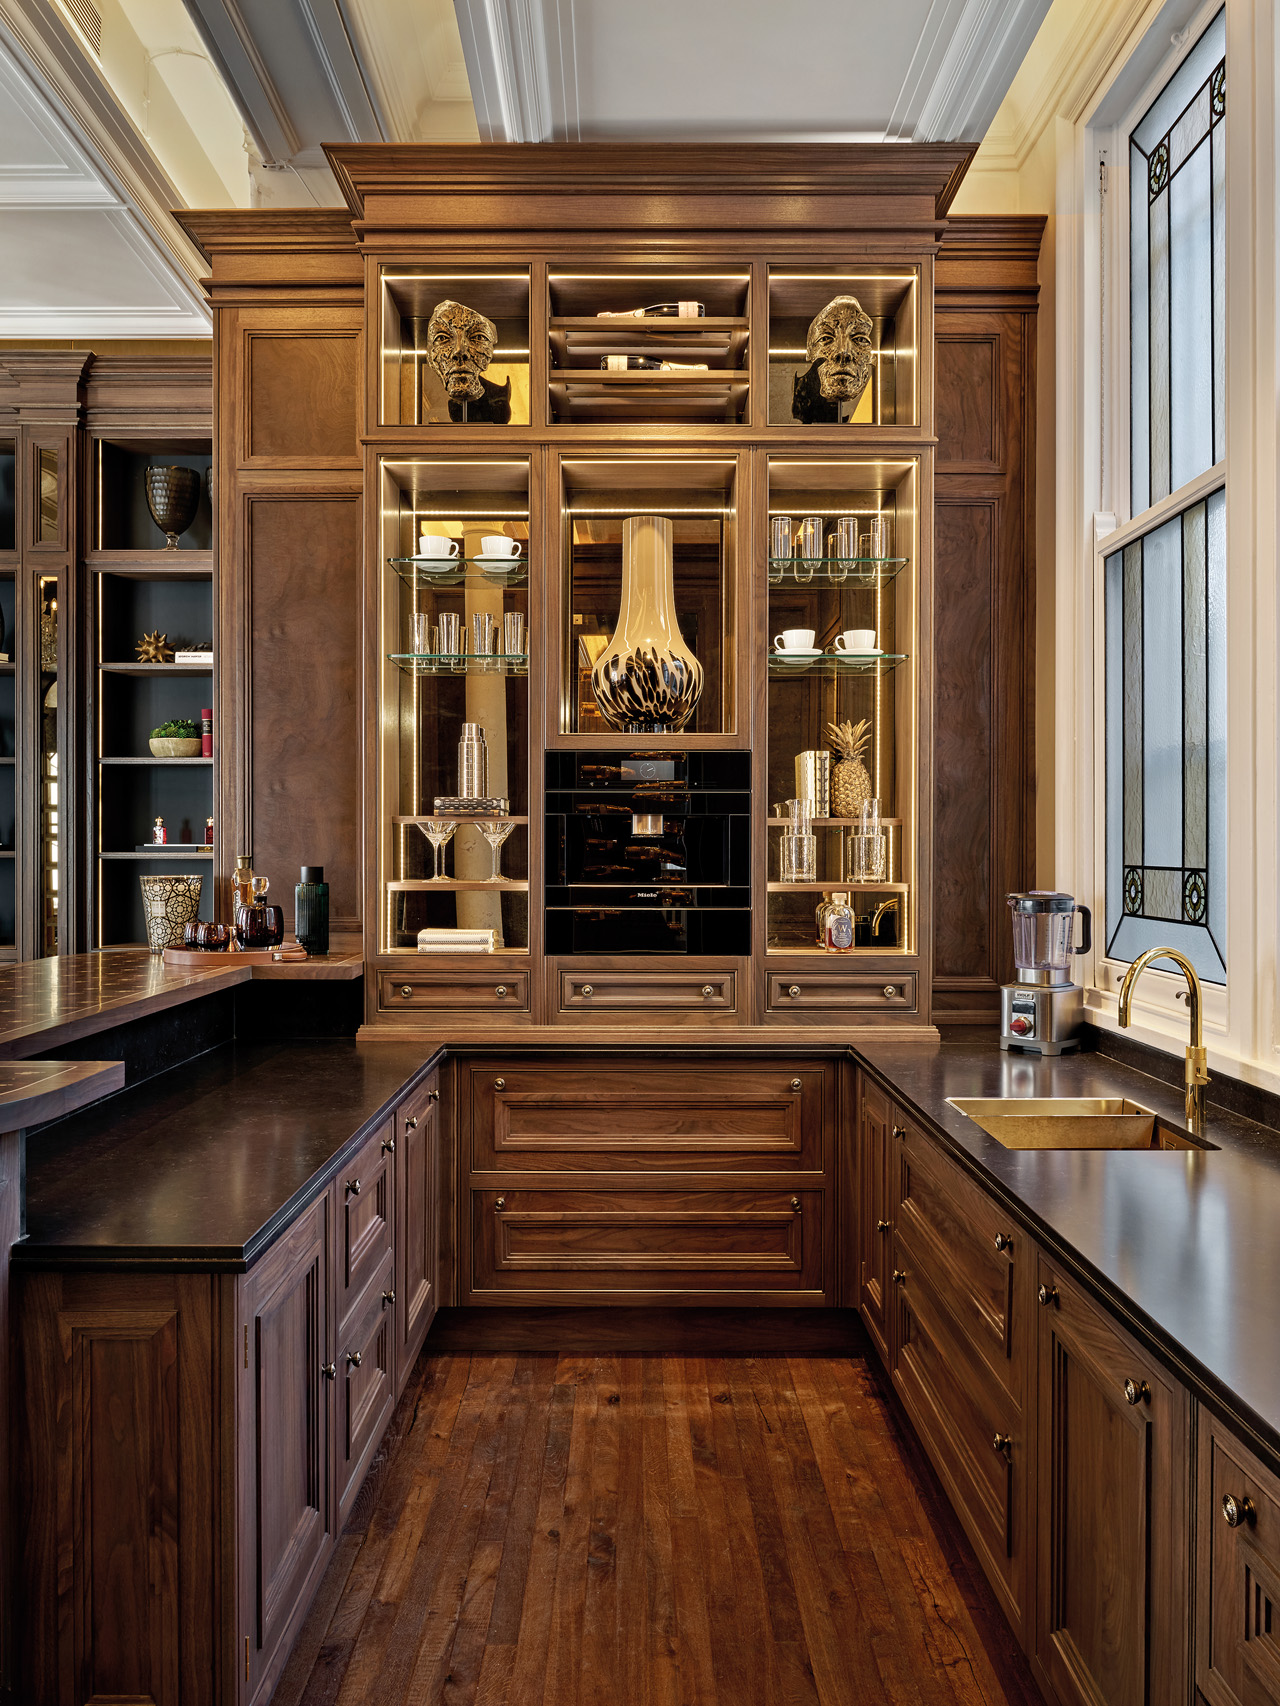 A wood panelled kitchen